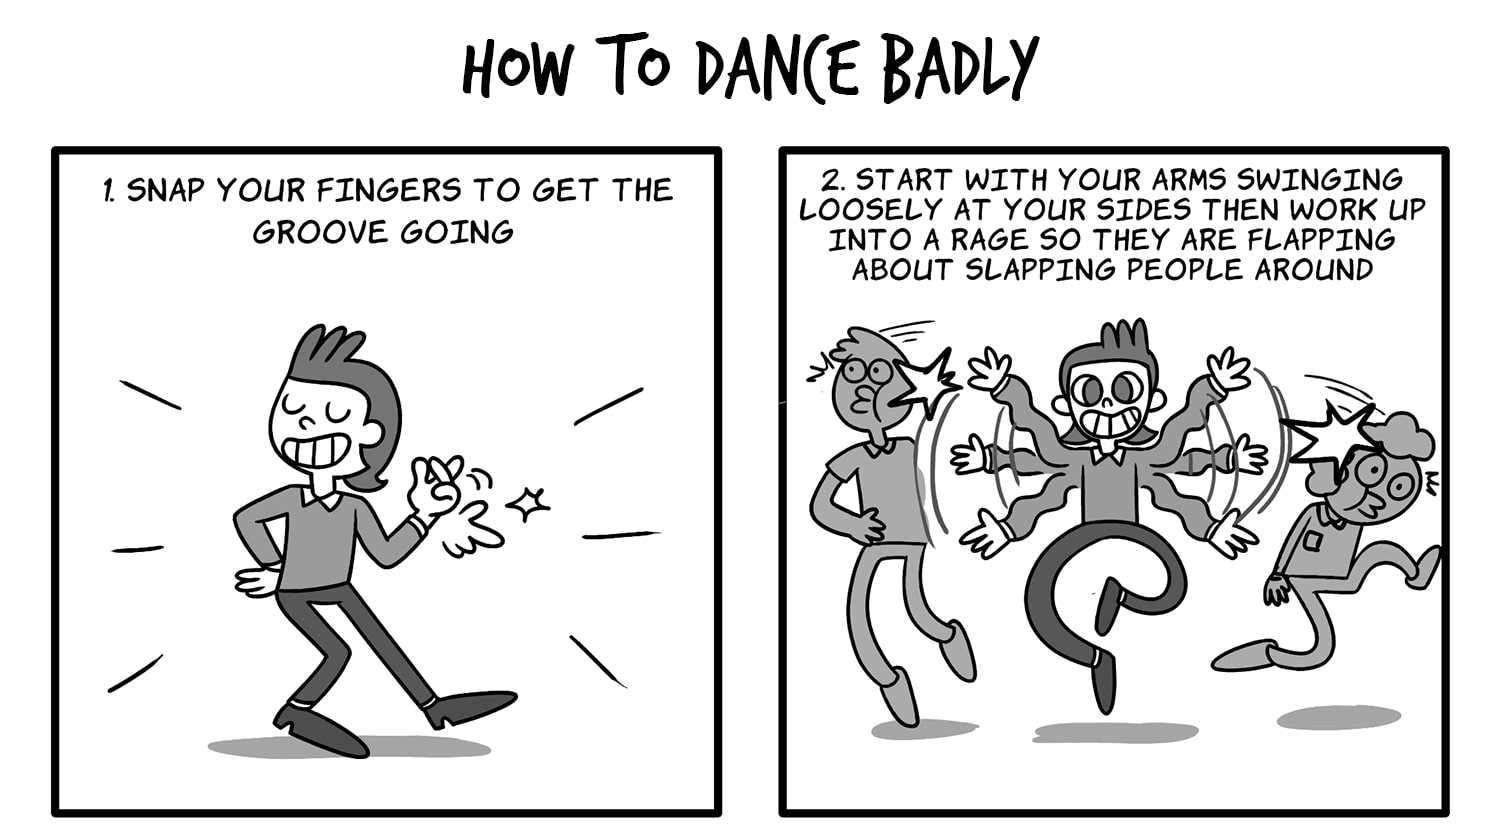 How to Dance Badly